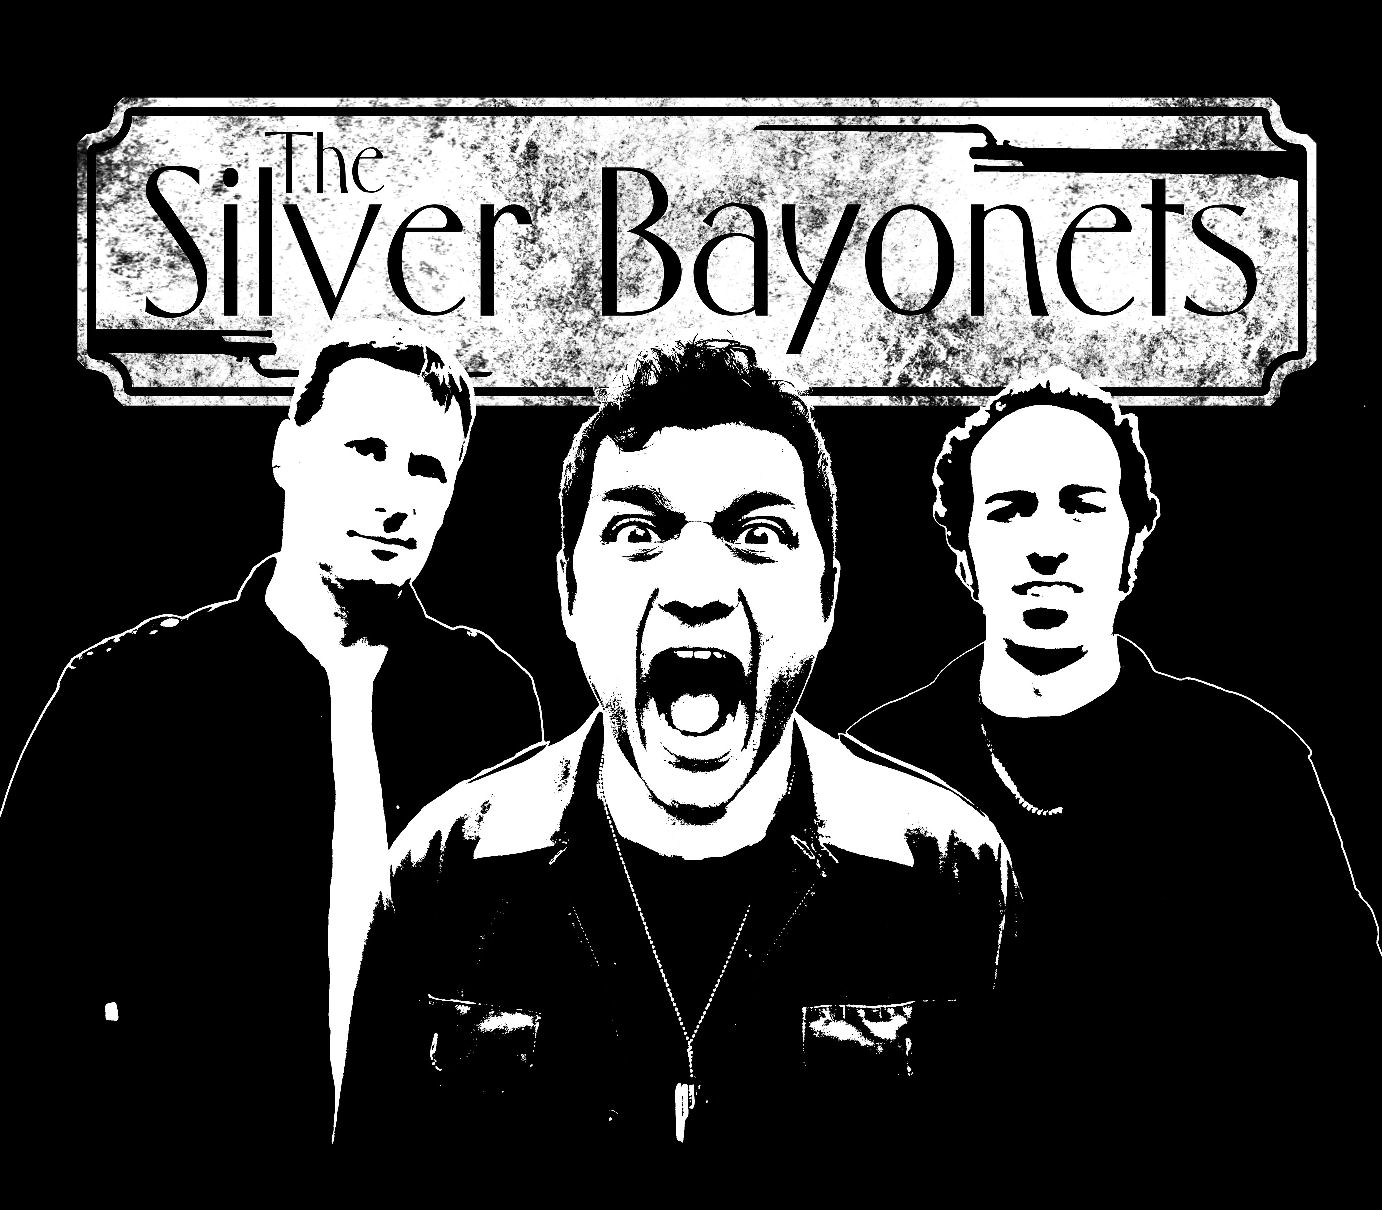  The Silver Bayonets – “Constant”